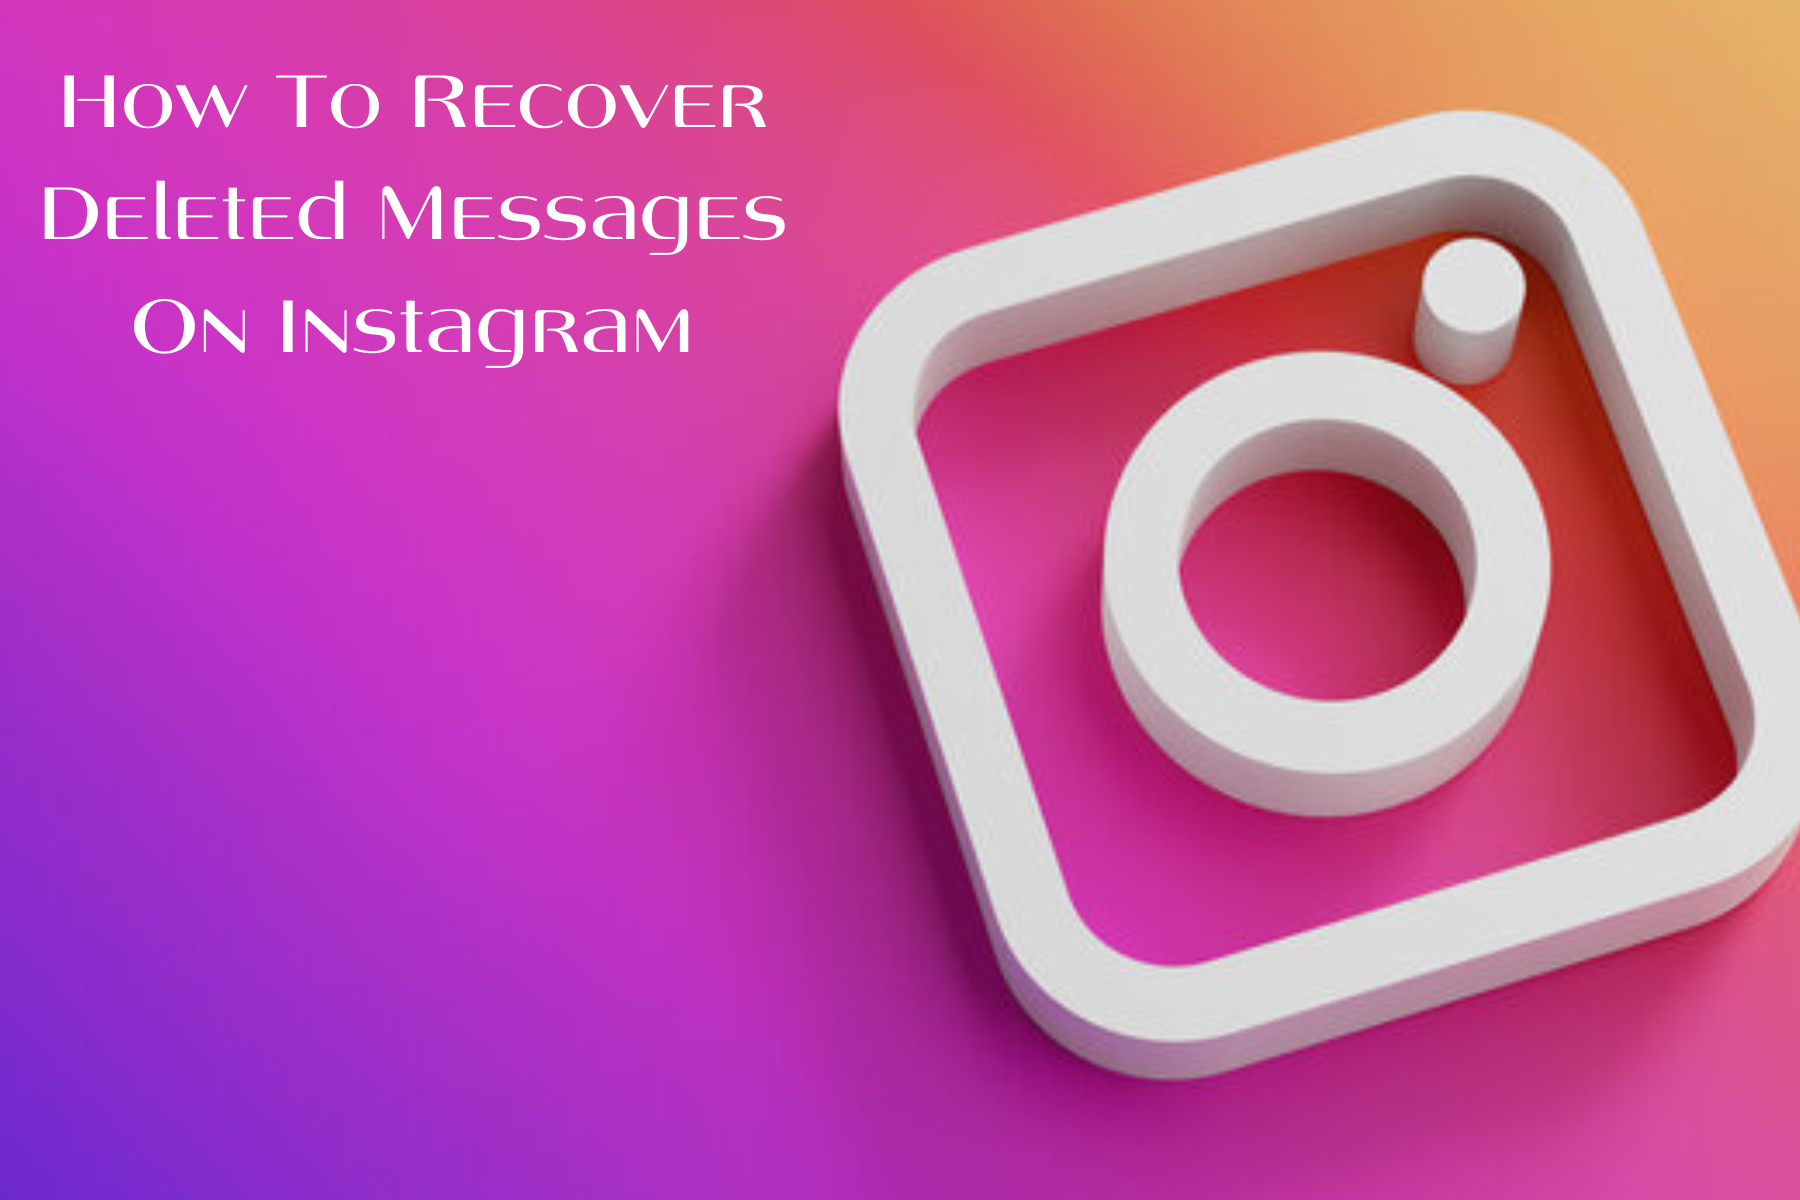 How To Recover Deleted Messages On Instagram - Is It Possible?